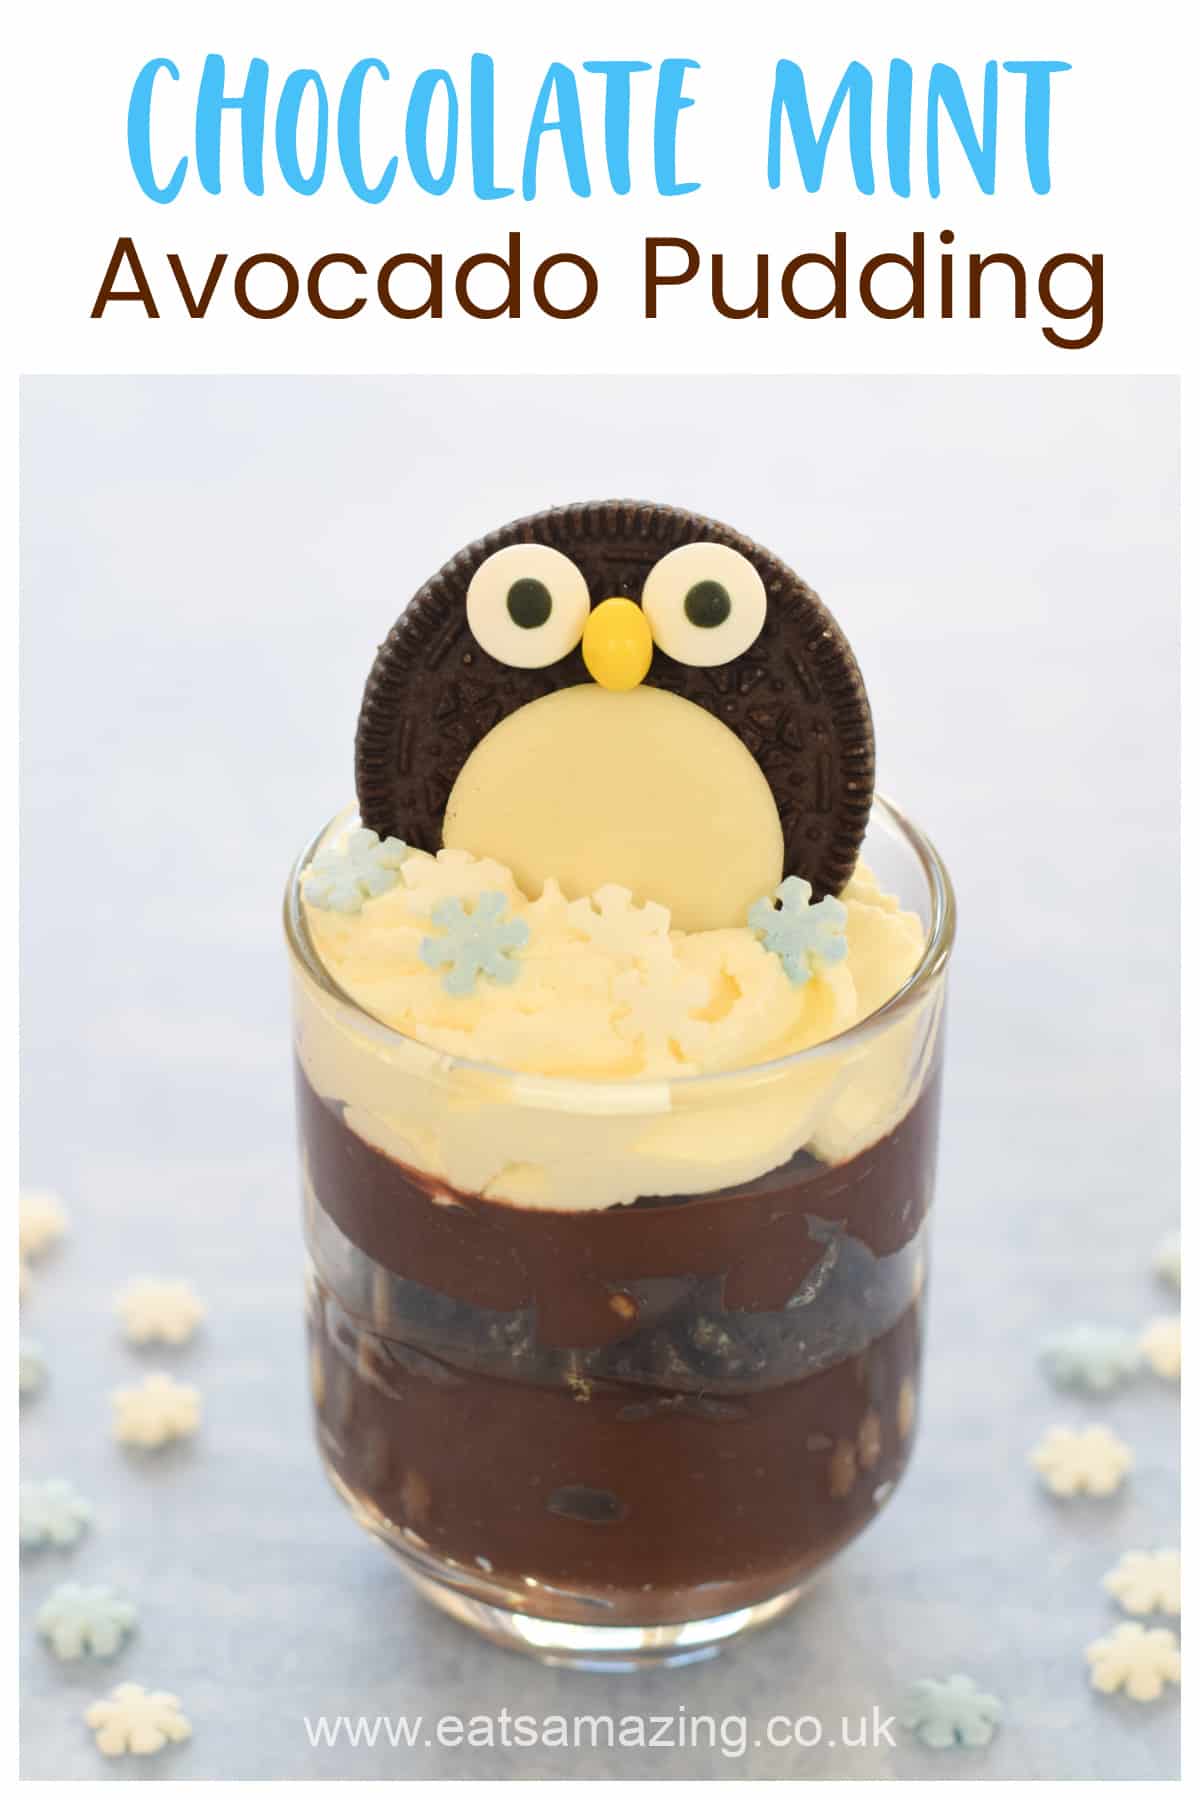 Healthy chocolate avocado pudding recipe with cute oreo penguin toppers - perfect for Christmas dessert